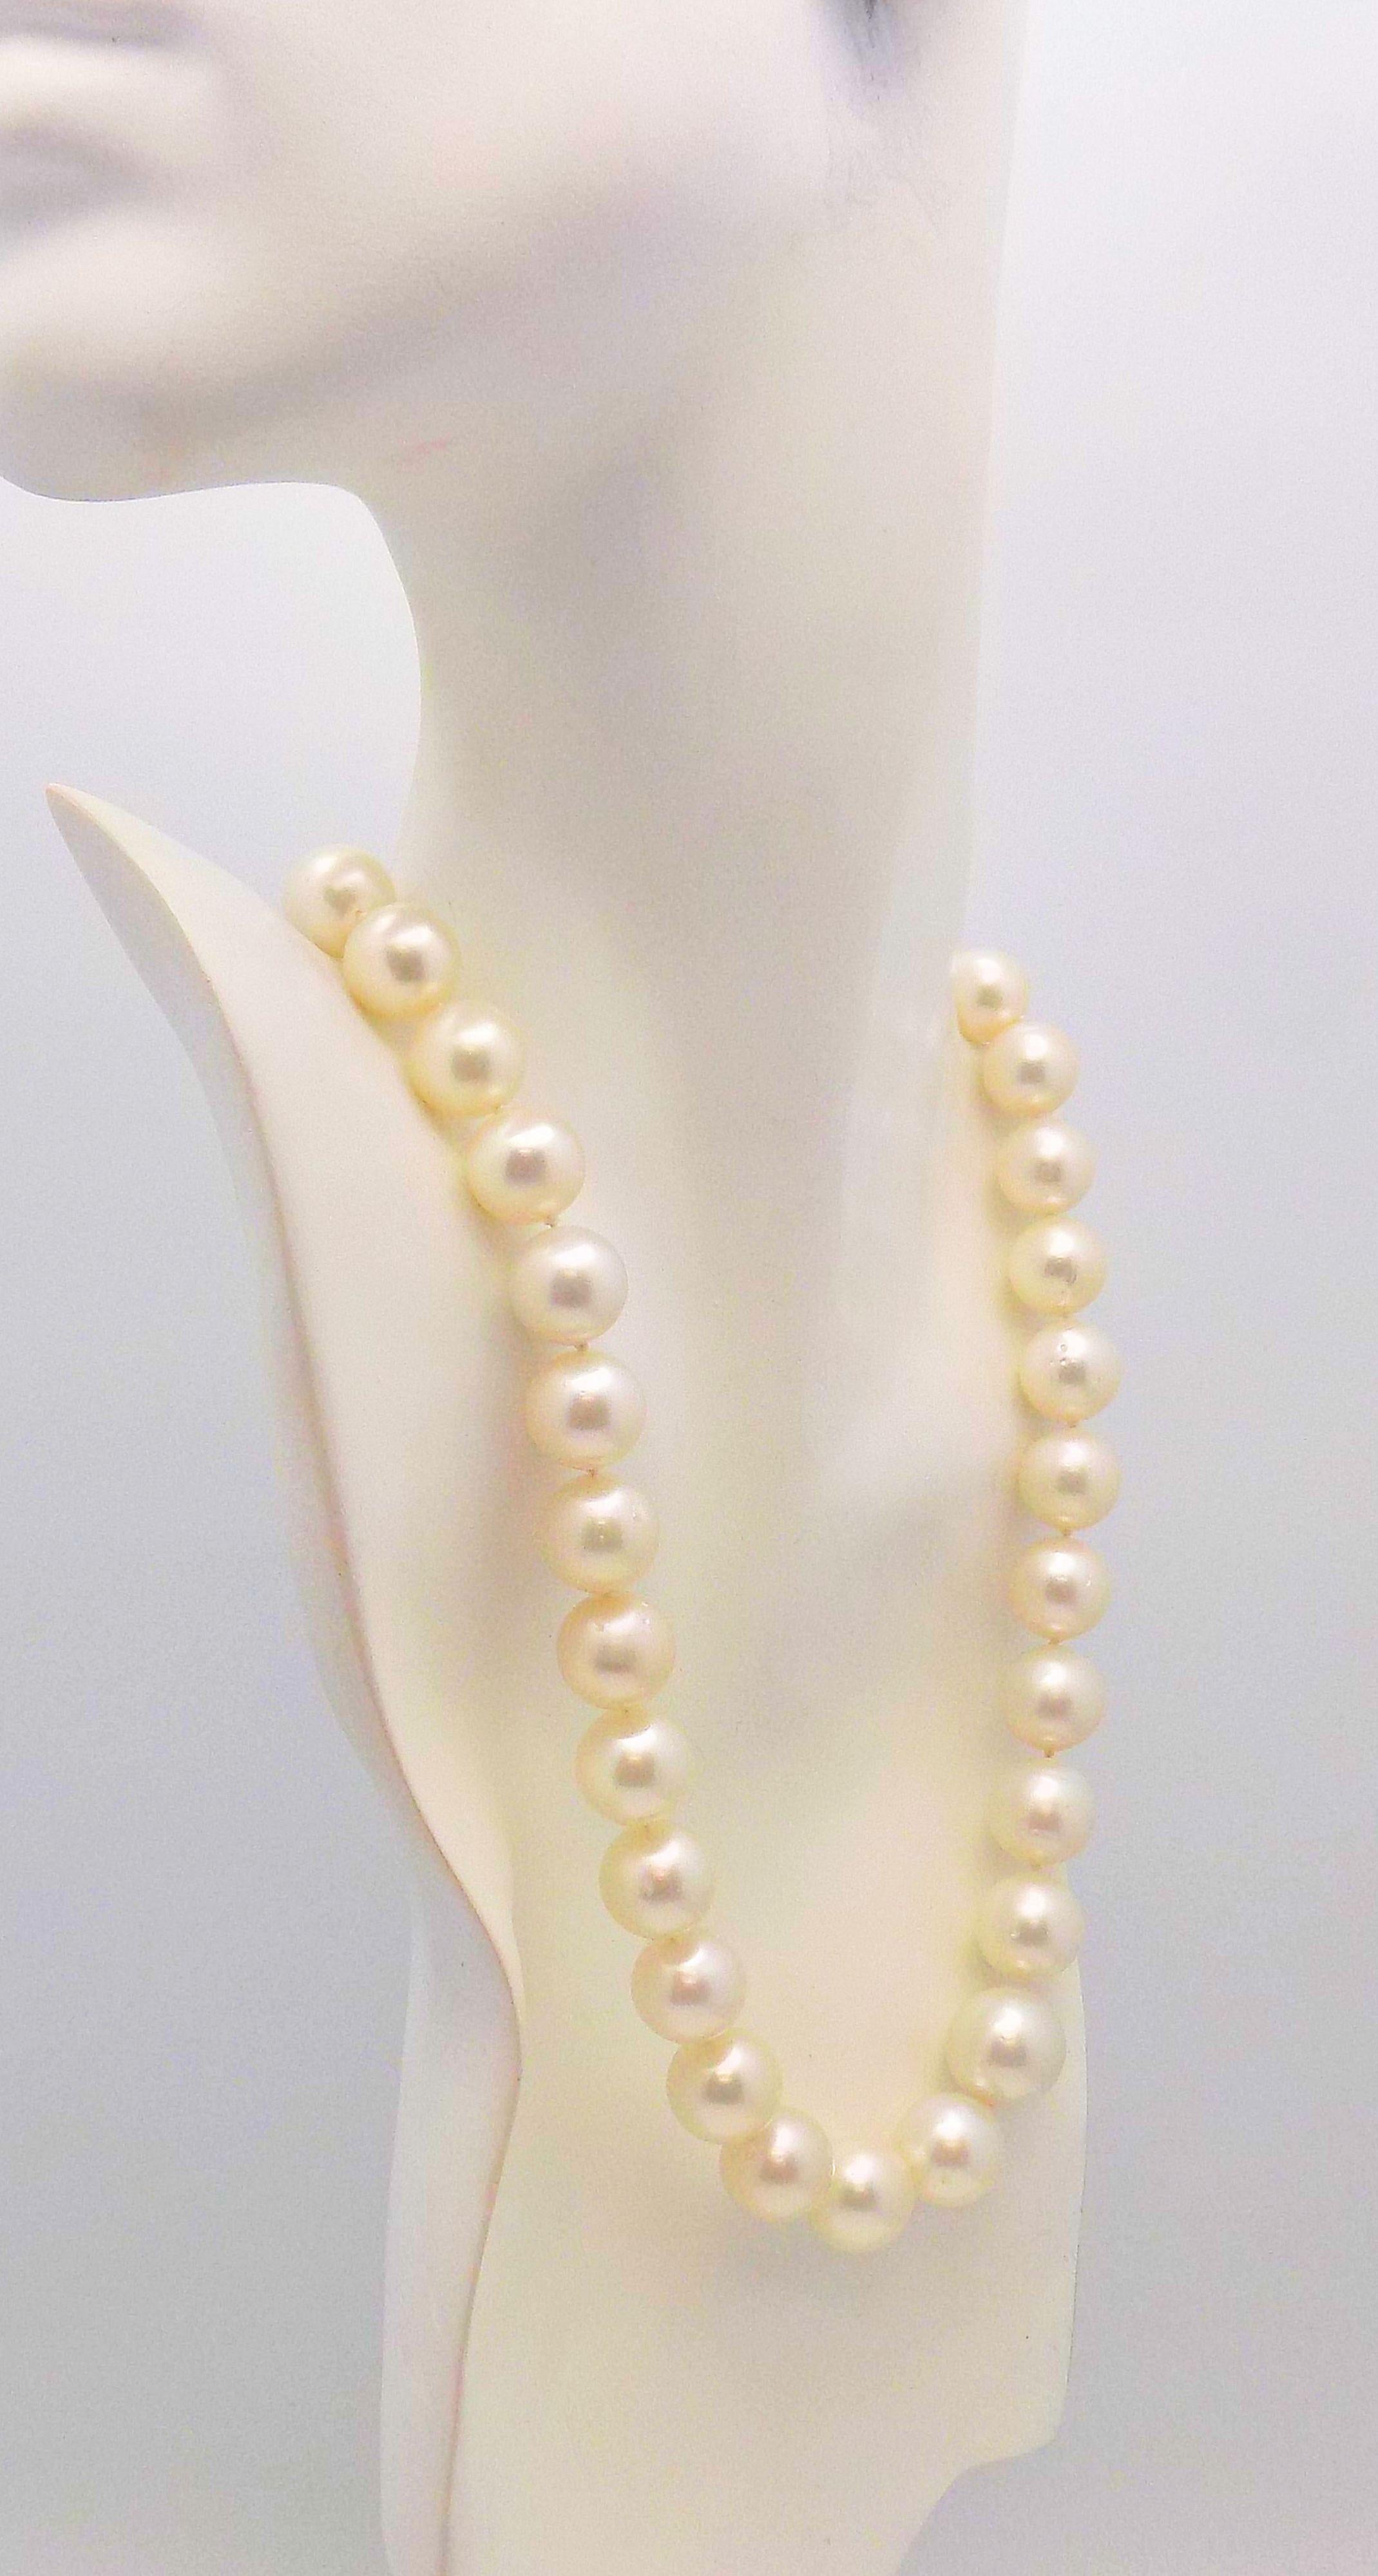 Classic Strand South Sea Cultured Pearls Measuring 13 X 16 MM. Excellent Luster, Round.  33 Pearls; 19.5